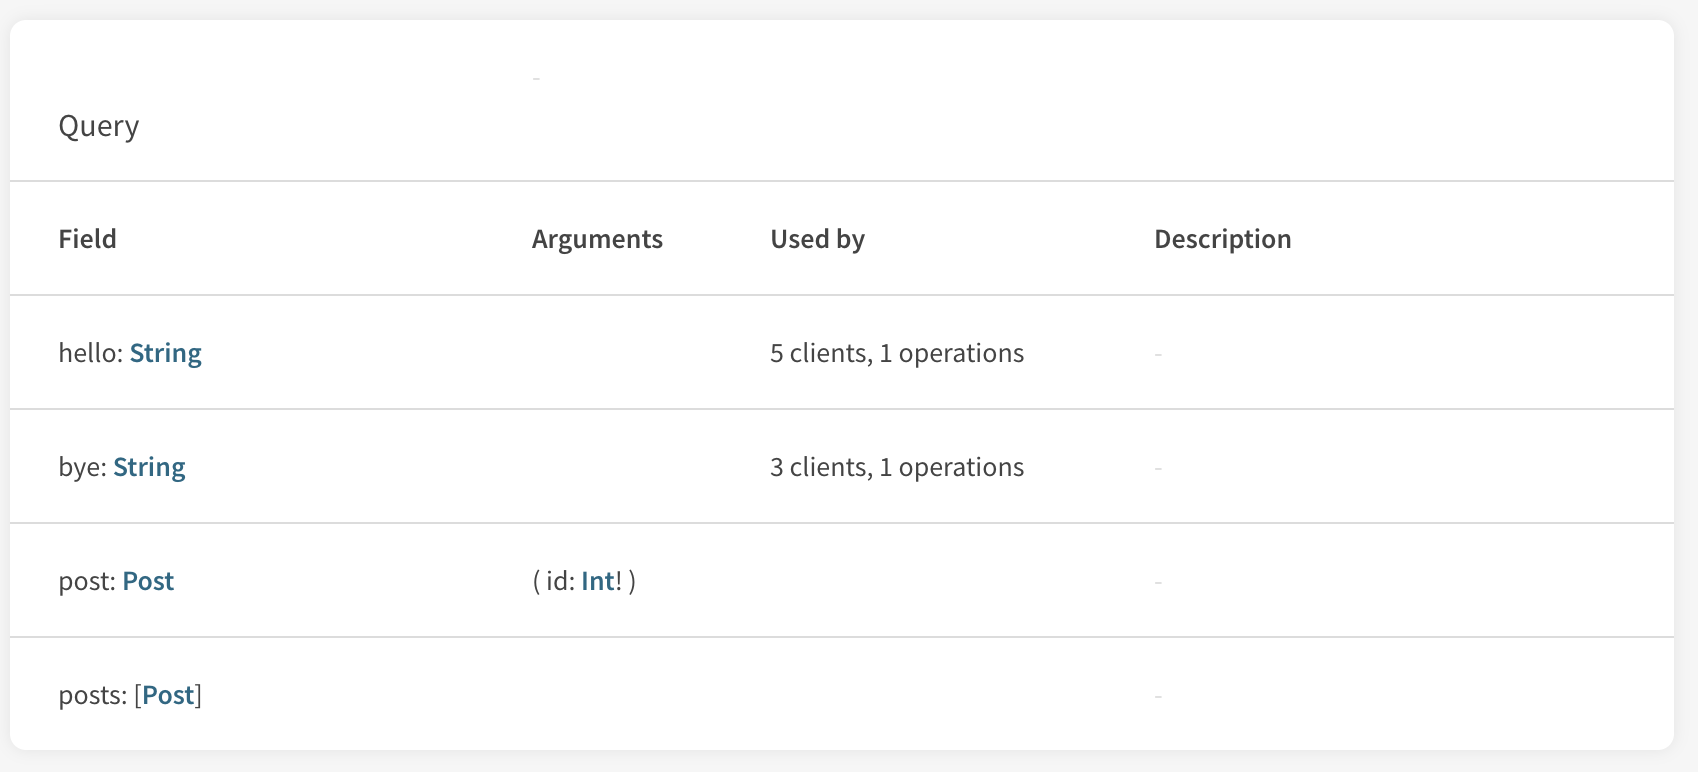 Table of client field usage